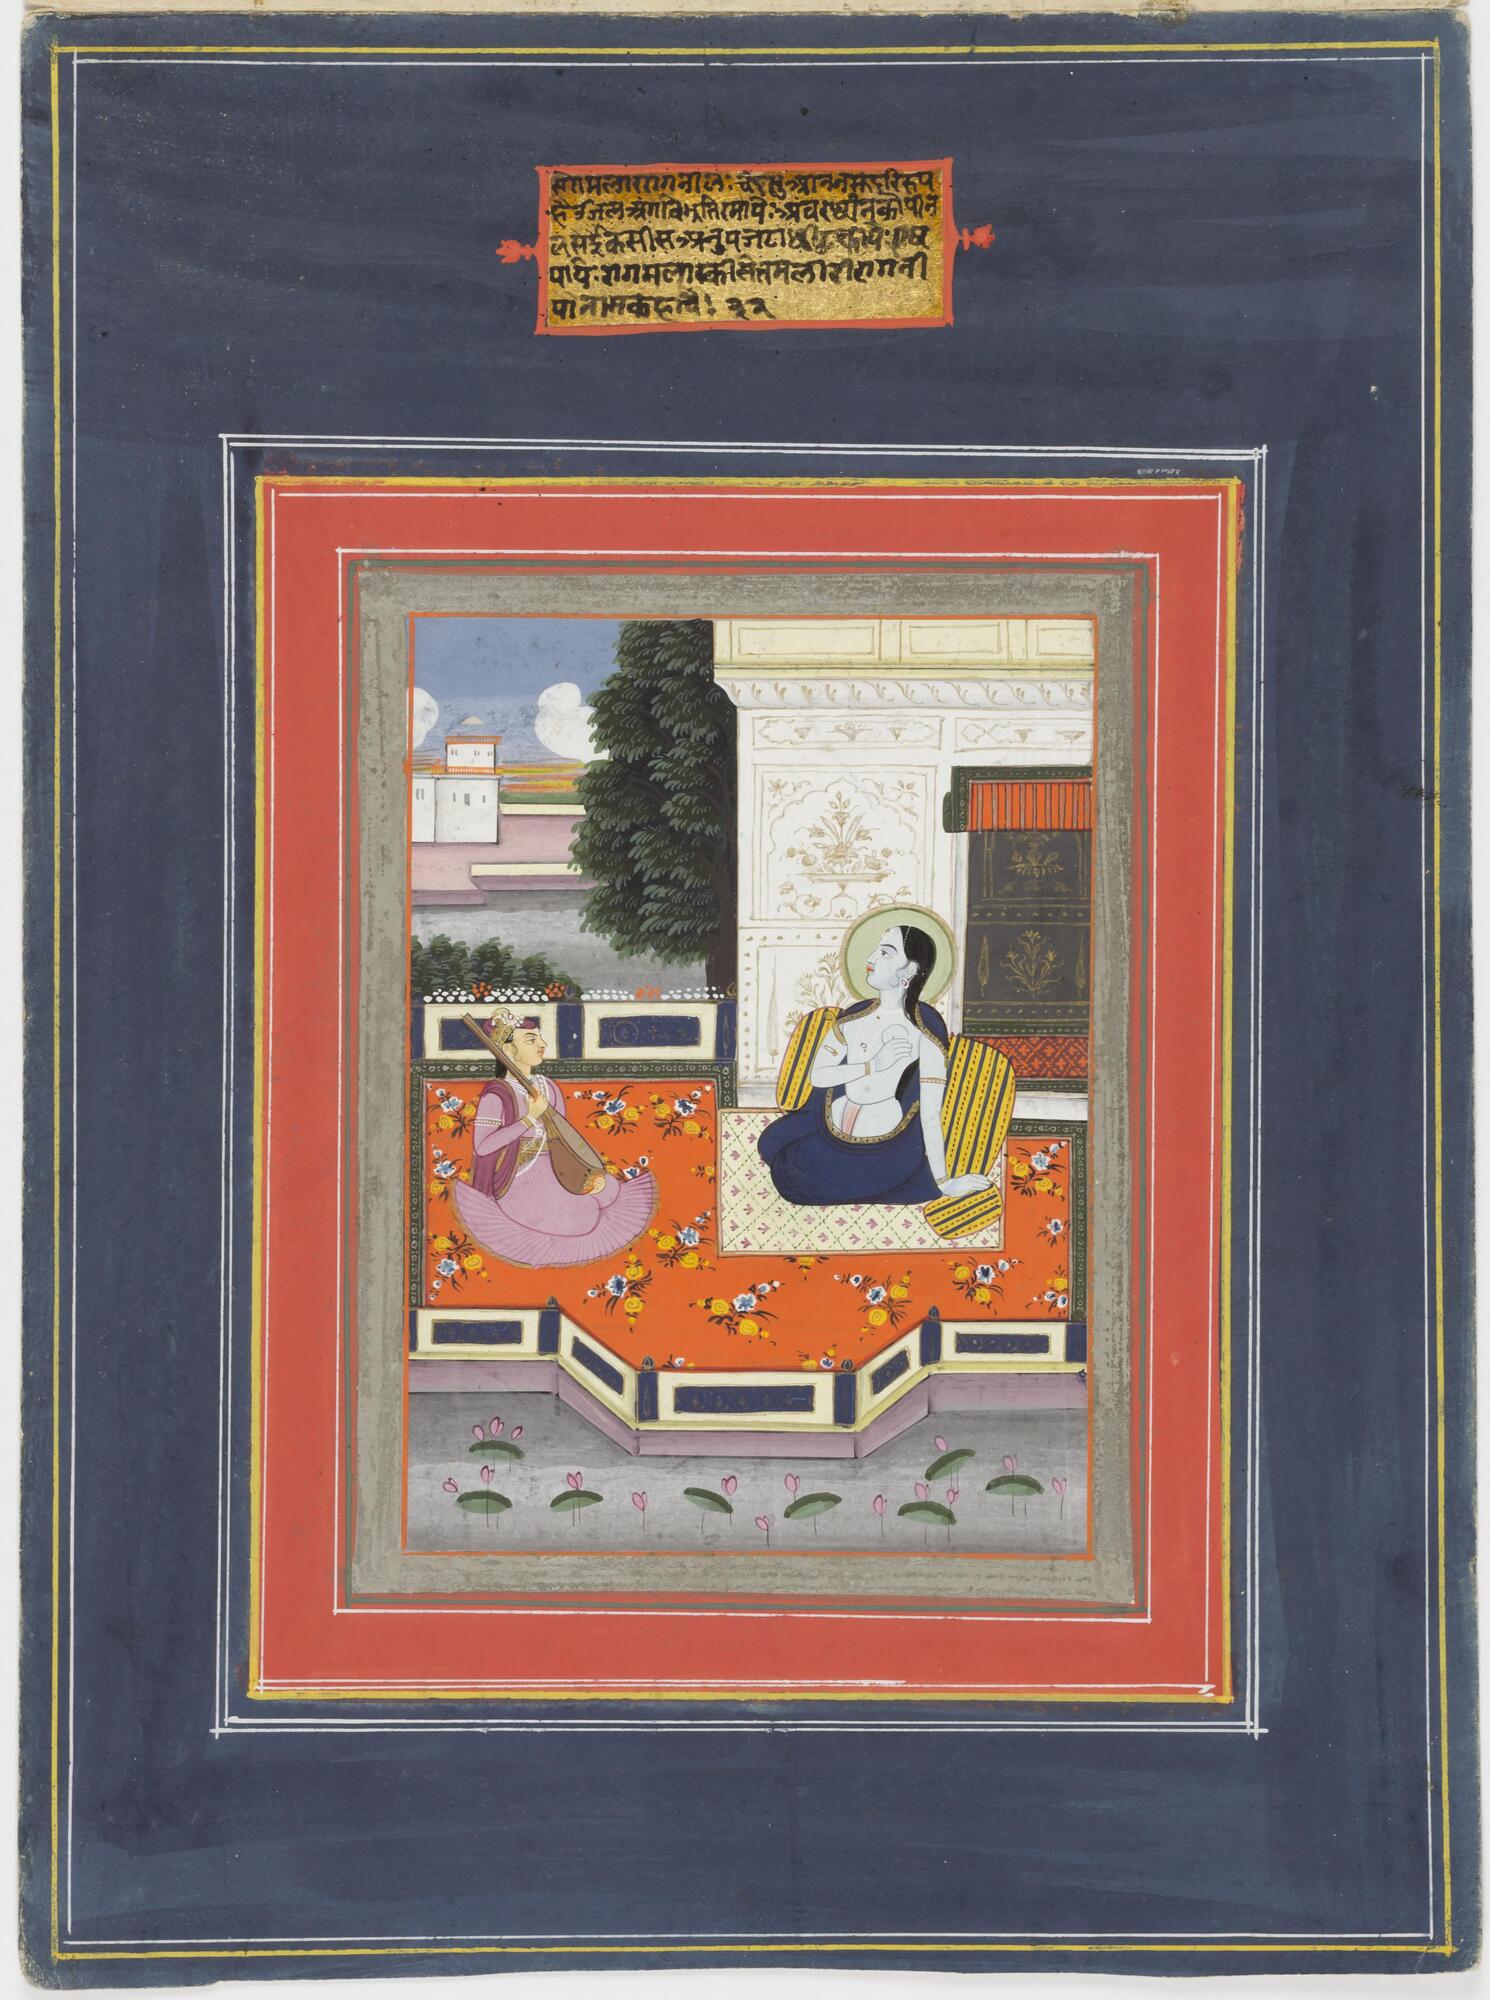 A blue-skinned female sits on an open-air terrace, behind her is a pavilion. Another female (?) figure is seated beside her, playing a stringed instrument, possibly the veena. A short verse is painted above the depicted scene.